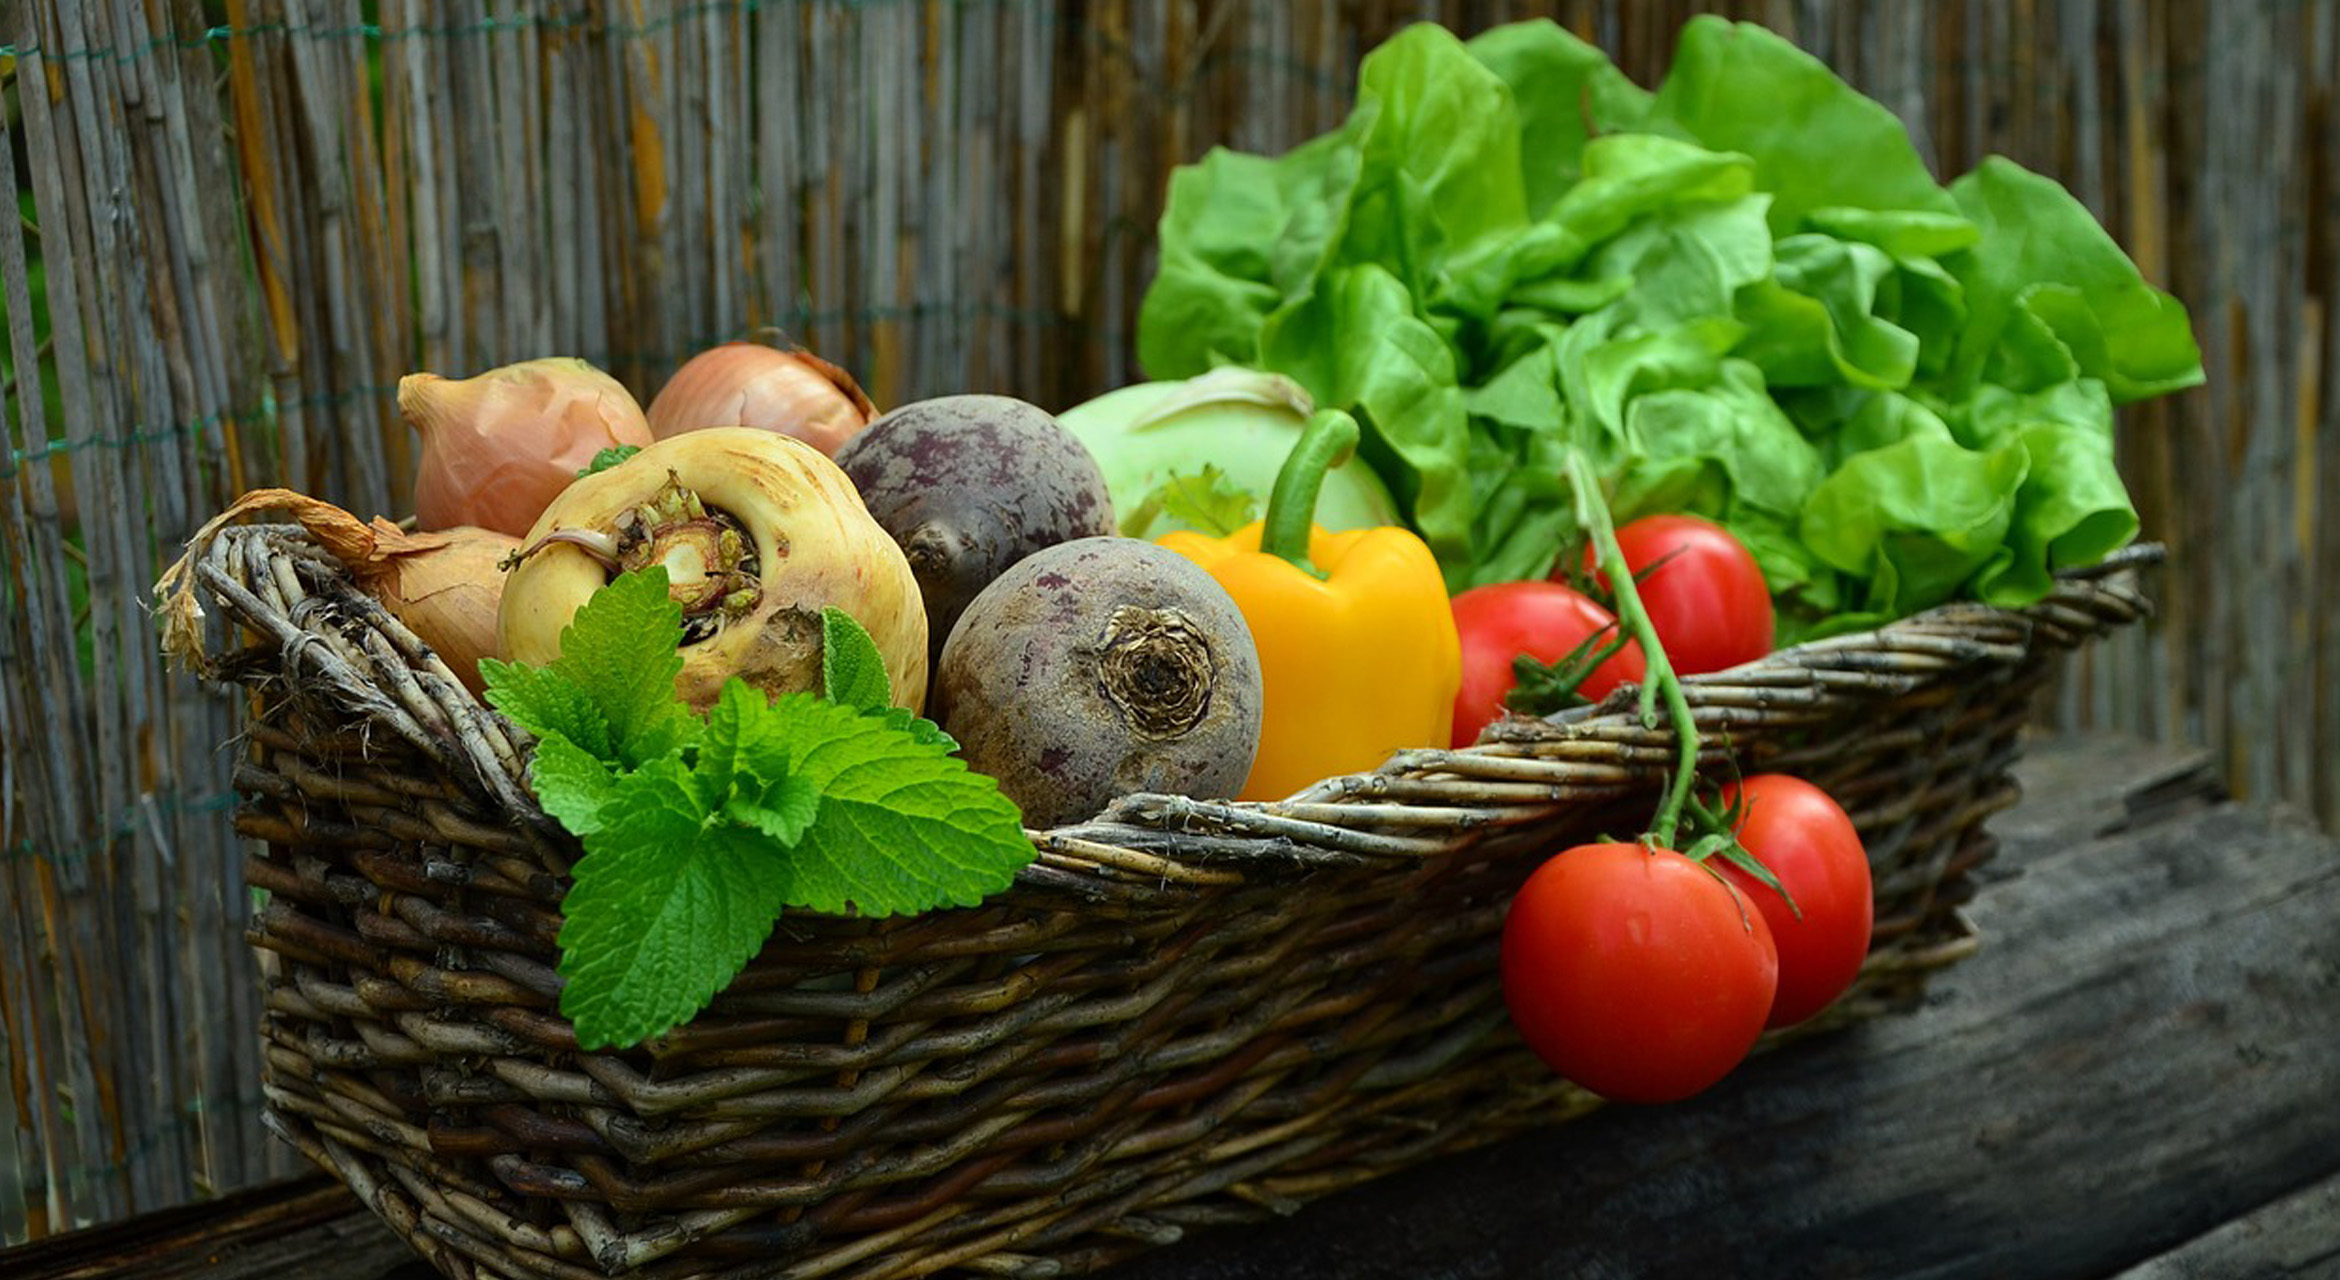 An image displaying a woven basket filled with an array of colorful, fresh fruits and vegetables. The assortment includes vibrant red tomatoes, leafy greens, crisp bell peppers, deep purple eggplants, bright oranges, yellow squash, and various other seasonal produce. The arrangement symbolizes a diverse selection of nutritious foods rich in antioxidants and anti-inflammatory properties. The vibrant colors and variety of fruits and vegetables signify a wholesome and balanced approach to an anti-inflammatory dietary protocol, promoting overall health and wellness.